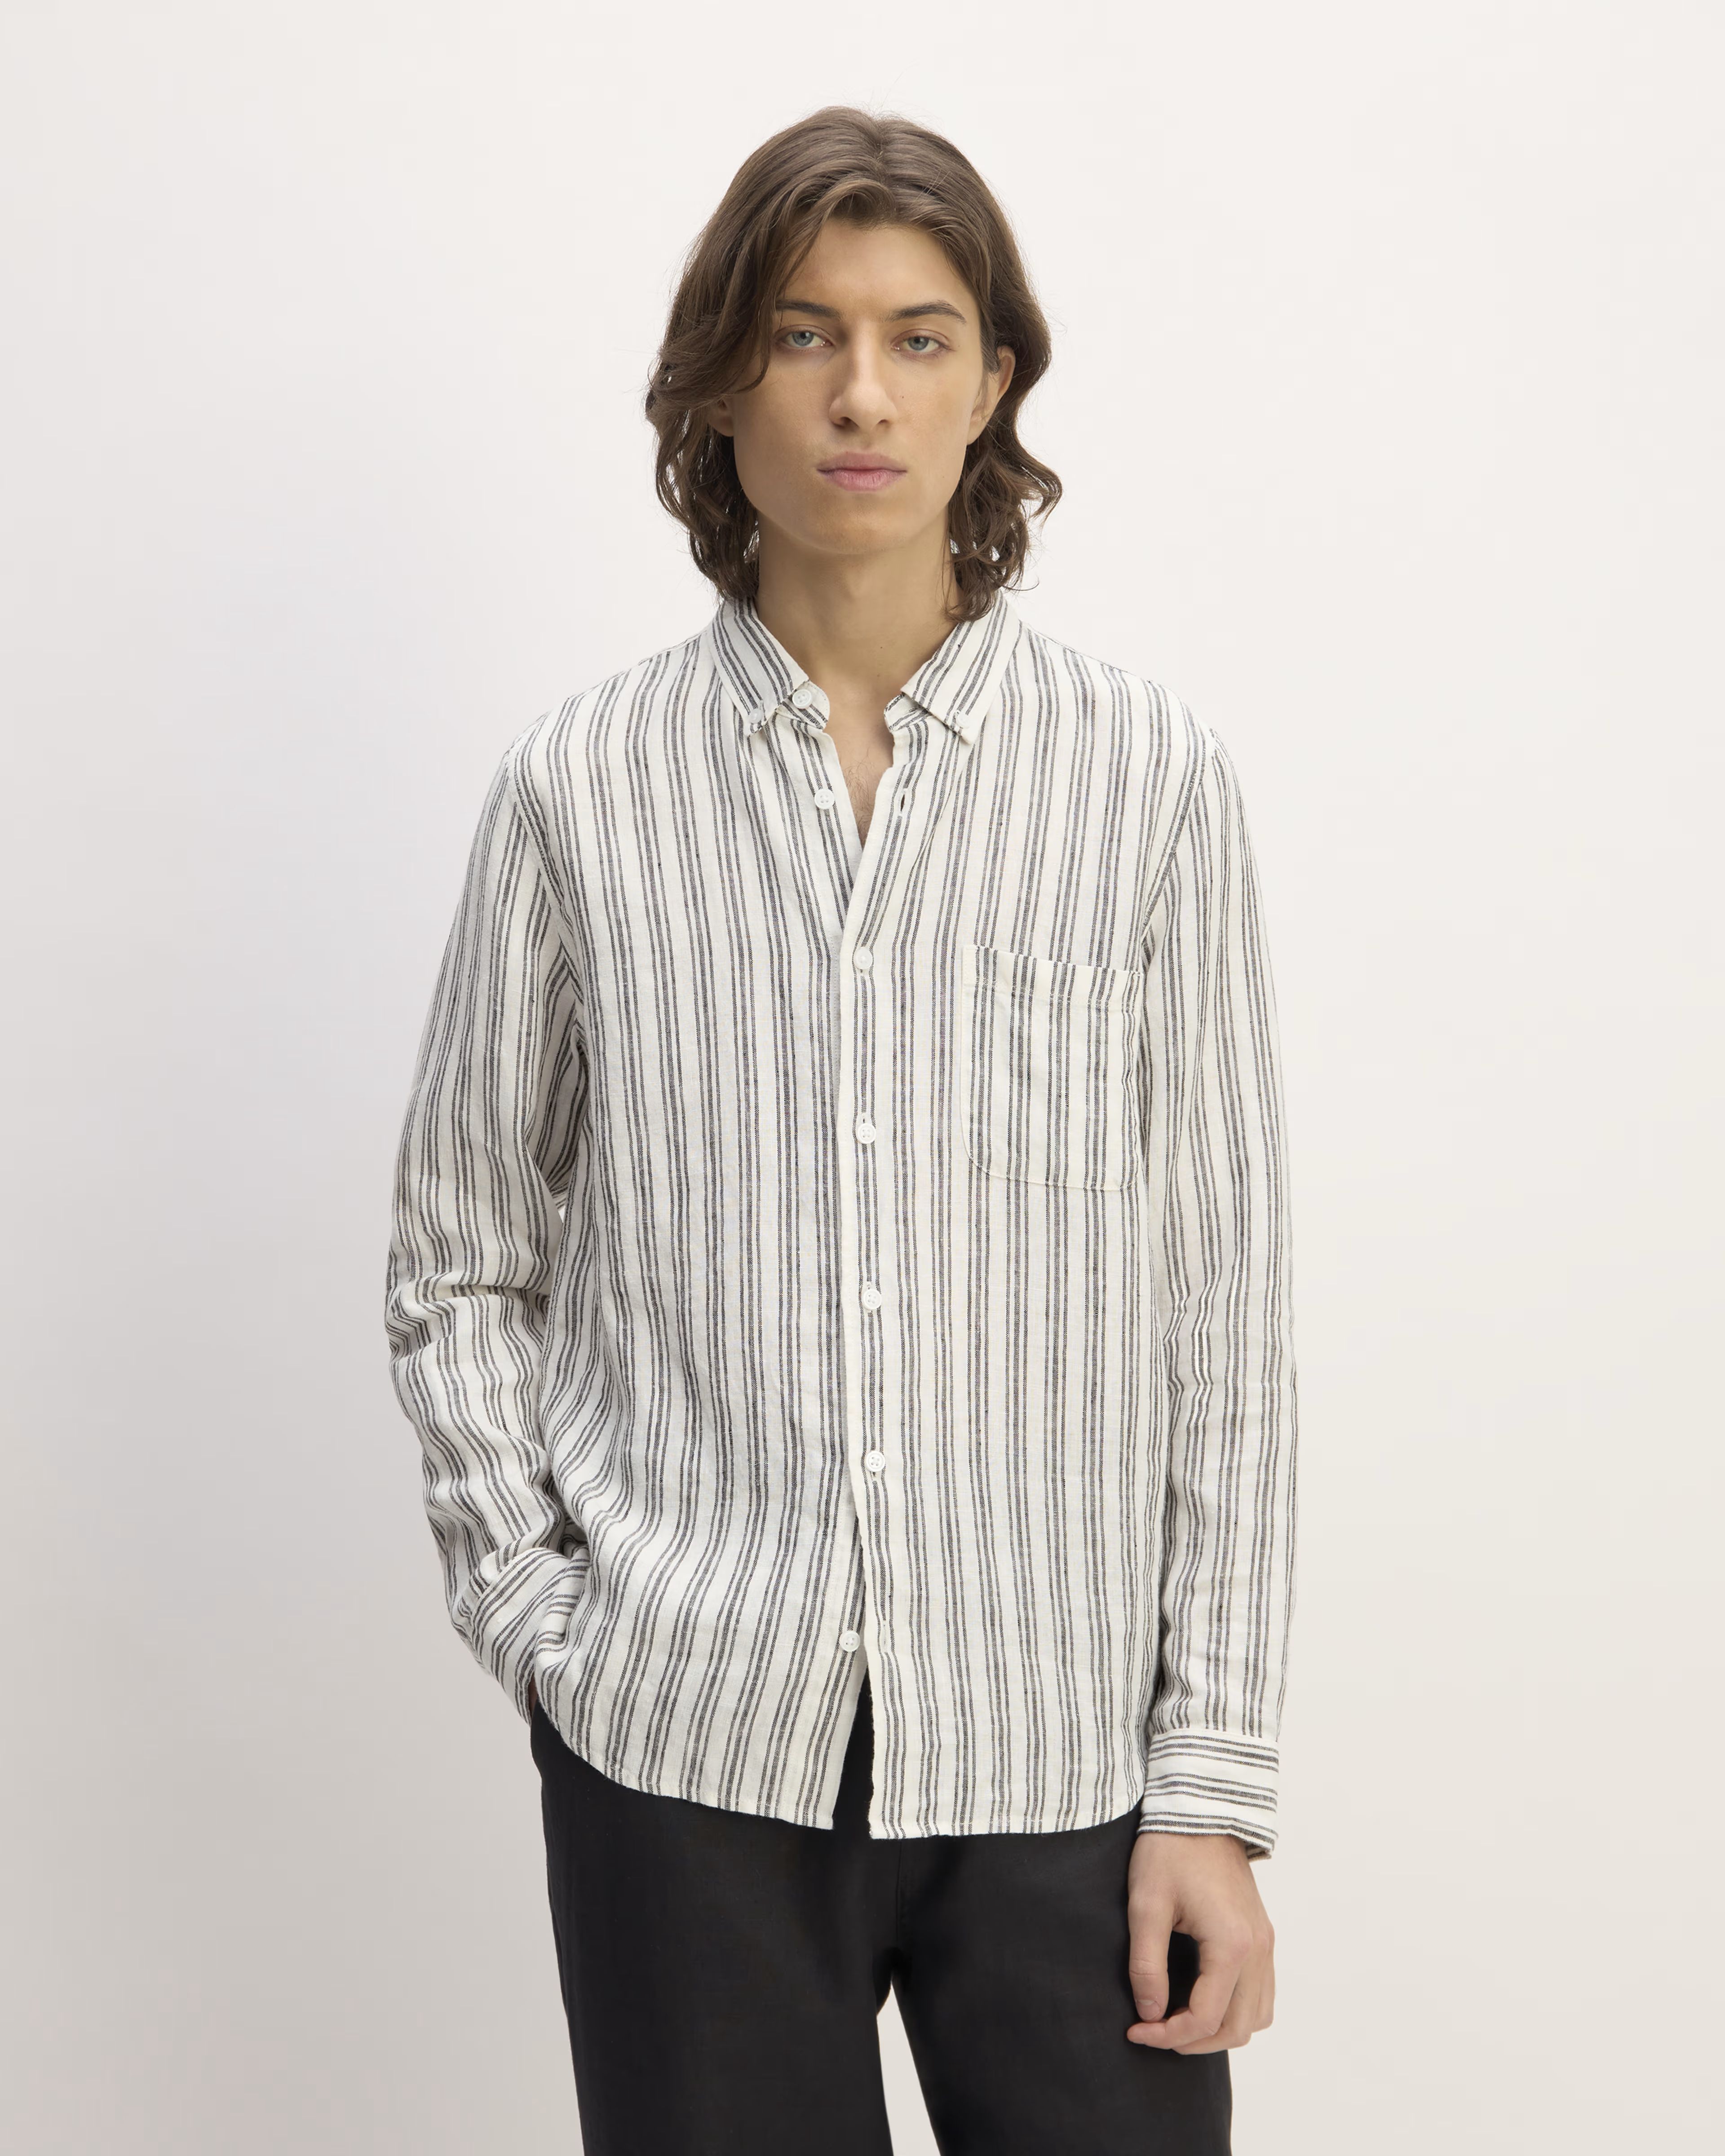 The Classic Shirt in Linen | Everlane